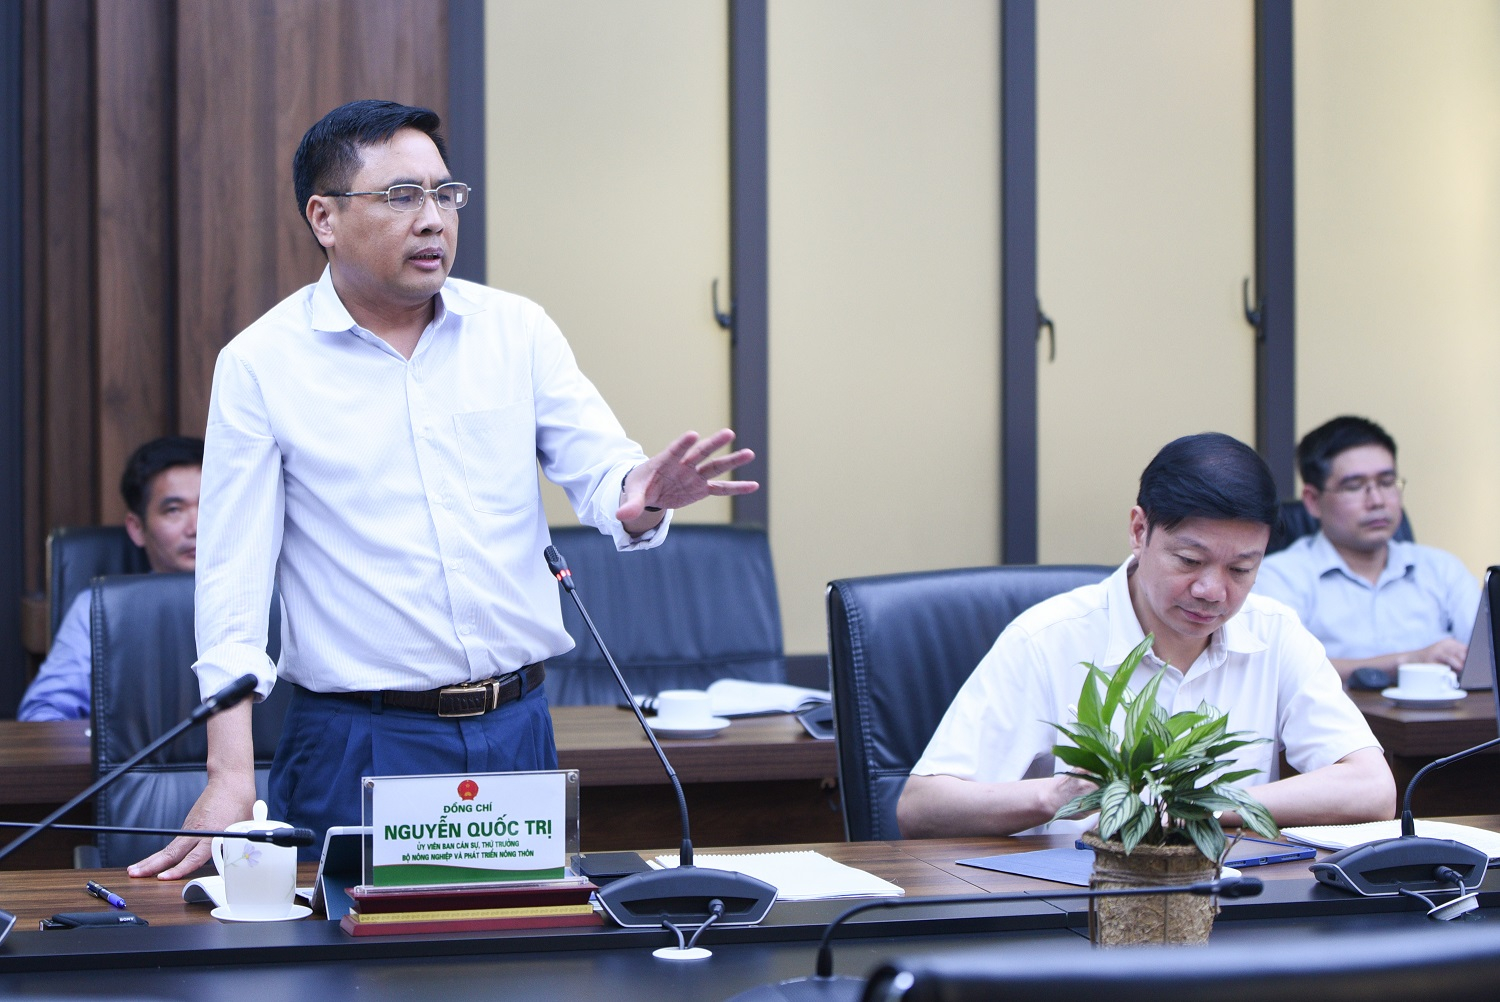 Deputy Minister Nguyen Quoc Tri contributed ideas for the development of the 'Scheme on multi-use value development of the forest ecosystem'. Photo: Tung Dinh.